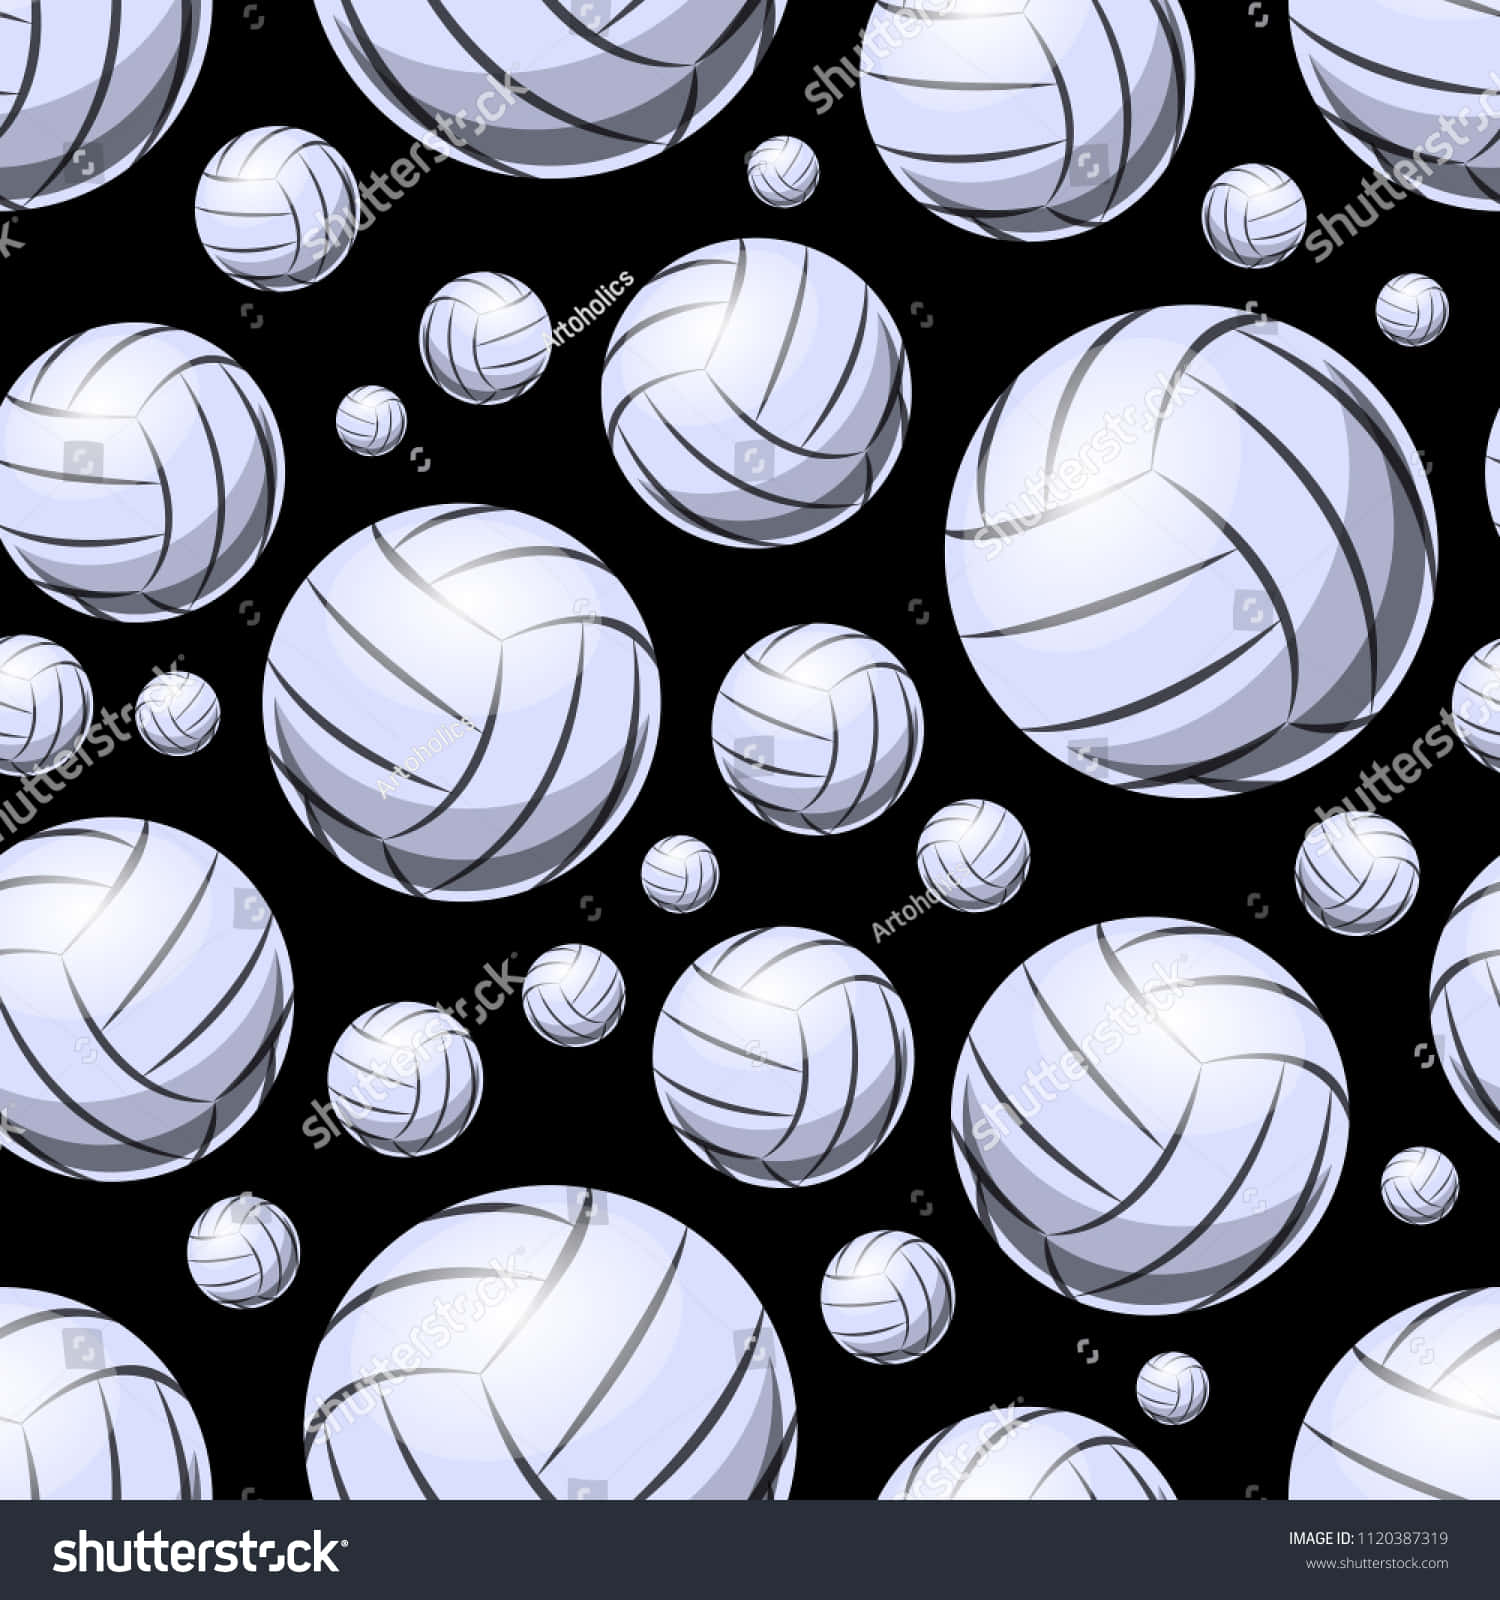 Aim High with the Volleyball Ball Wallpaper